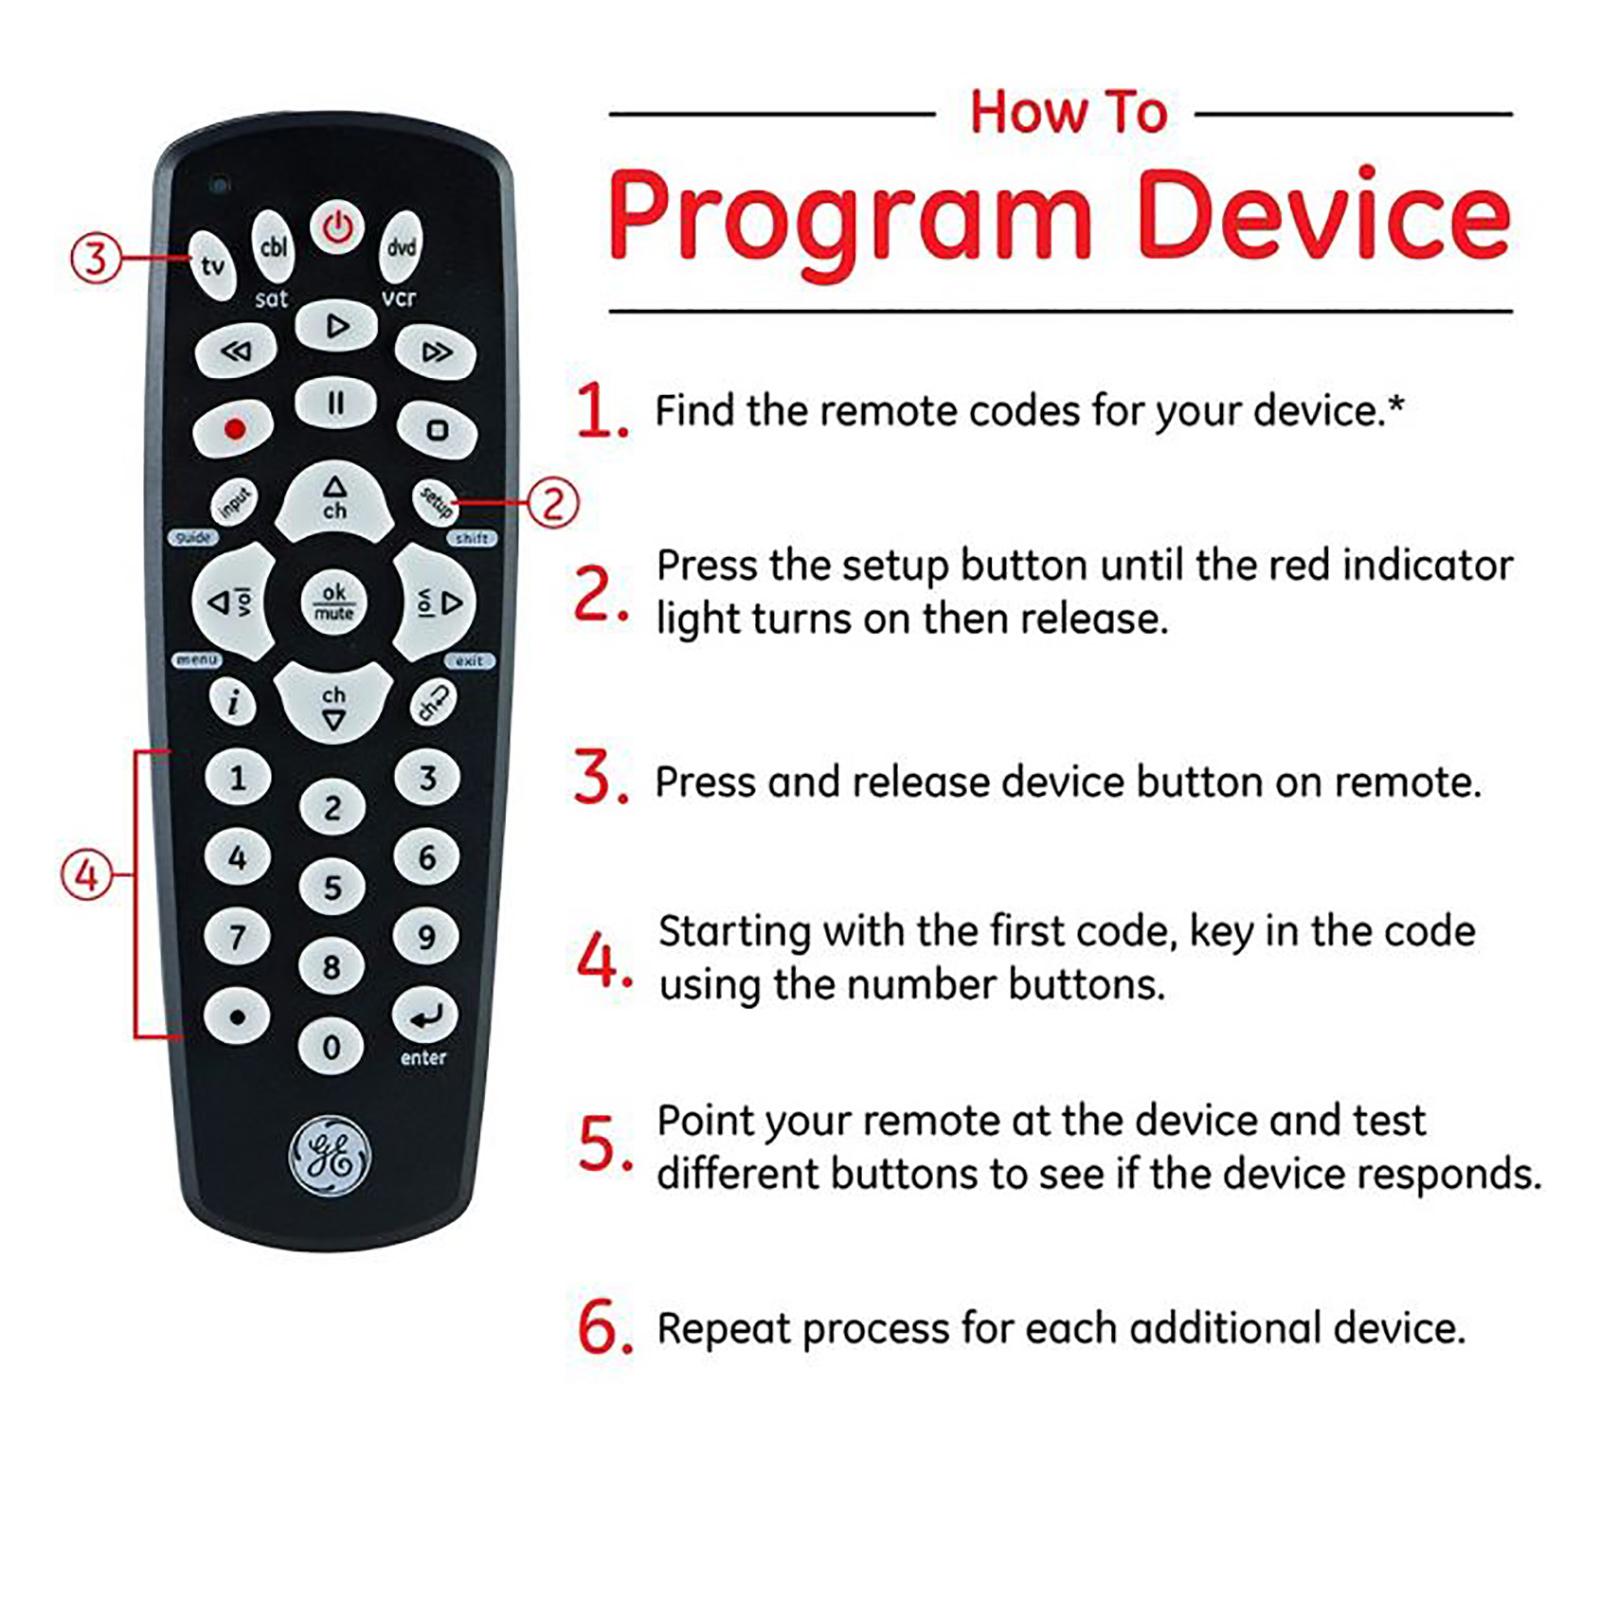 How to Program Device: 1) Find the remote codes for your device.* 2) Press the setup button until the red indicator light turns on then release. 3) Press and release device button on remote. 4) Starting with the first code, key in the code using the numbers buttons. 5) Point your remote at the device and test different buttons to see if the device responds.